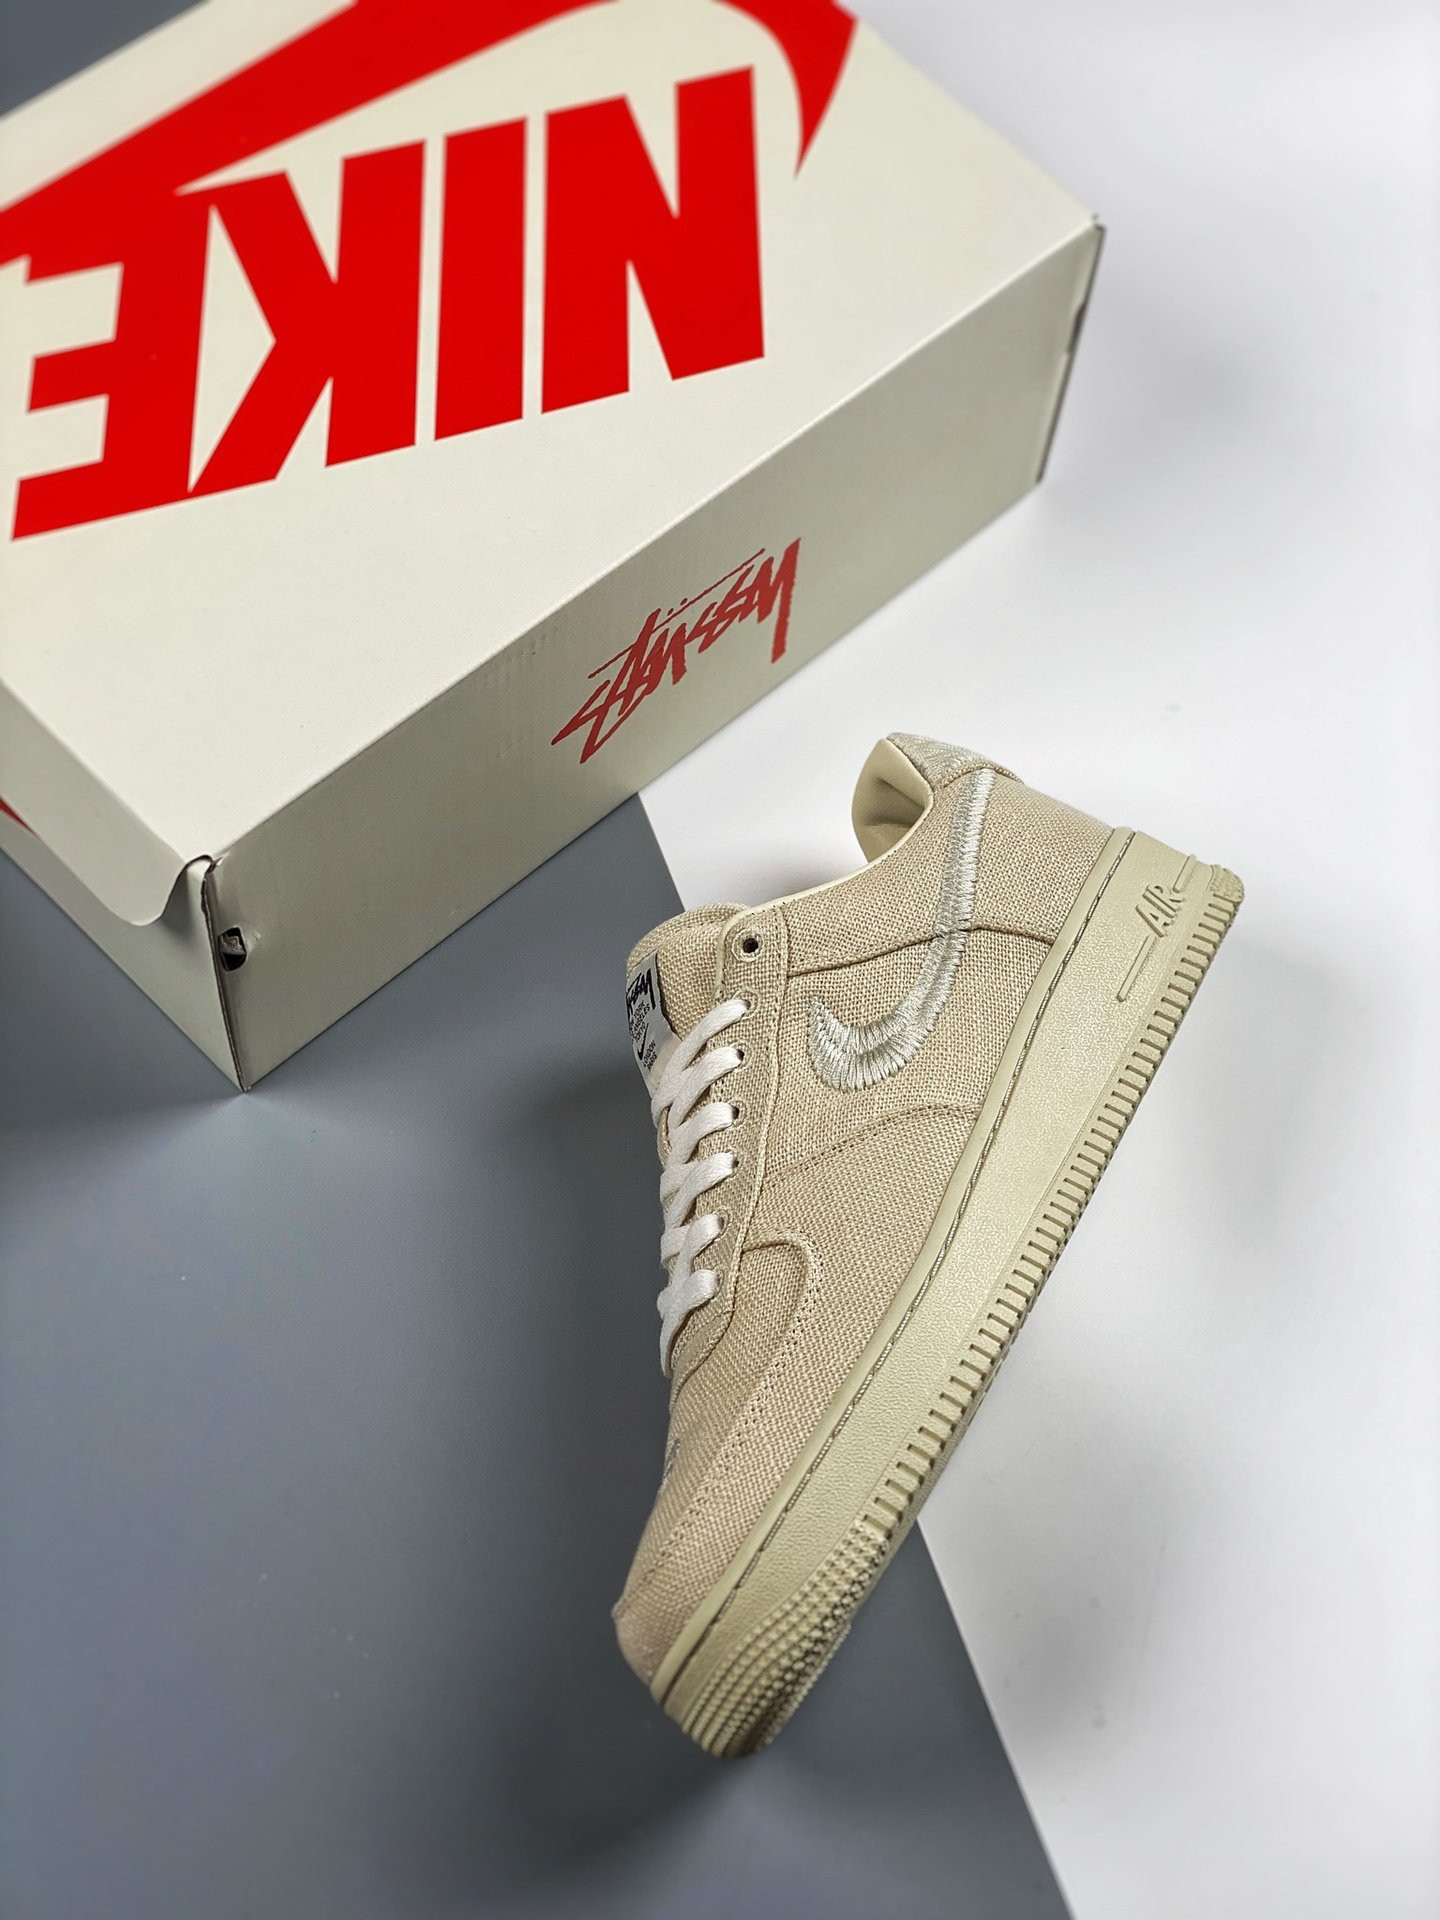 Stussy x Nike Air Force 1 Low Fossil Stone CZ9084-200 For Sale